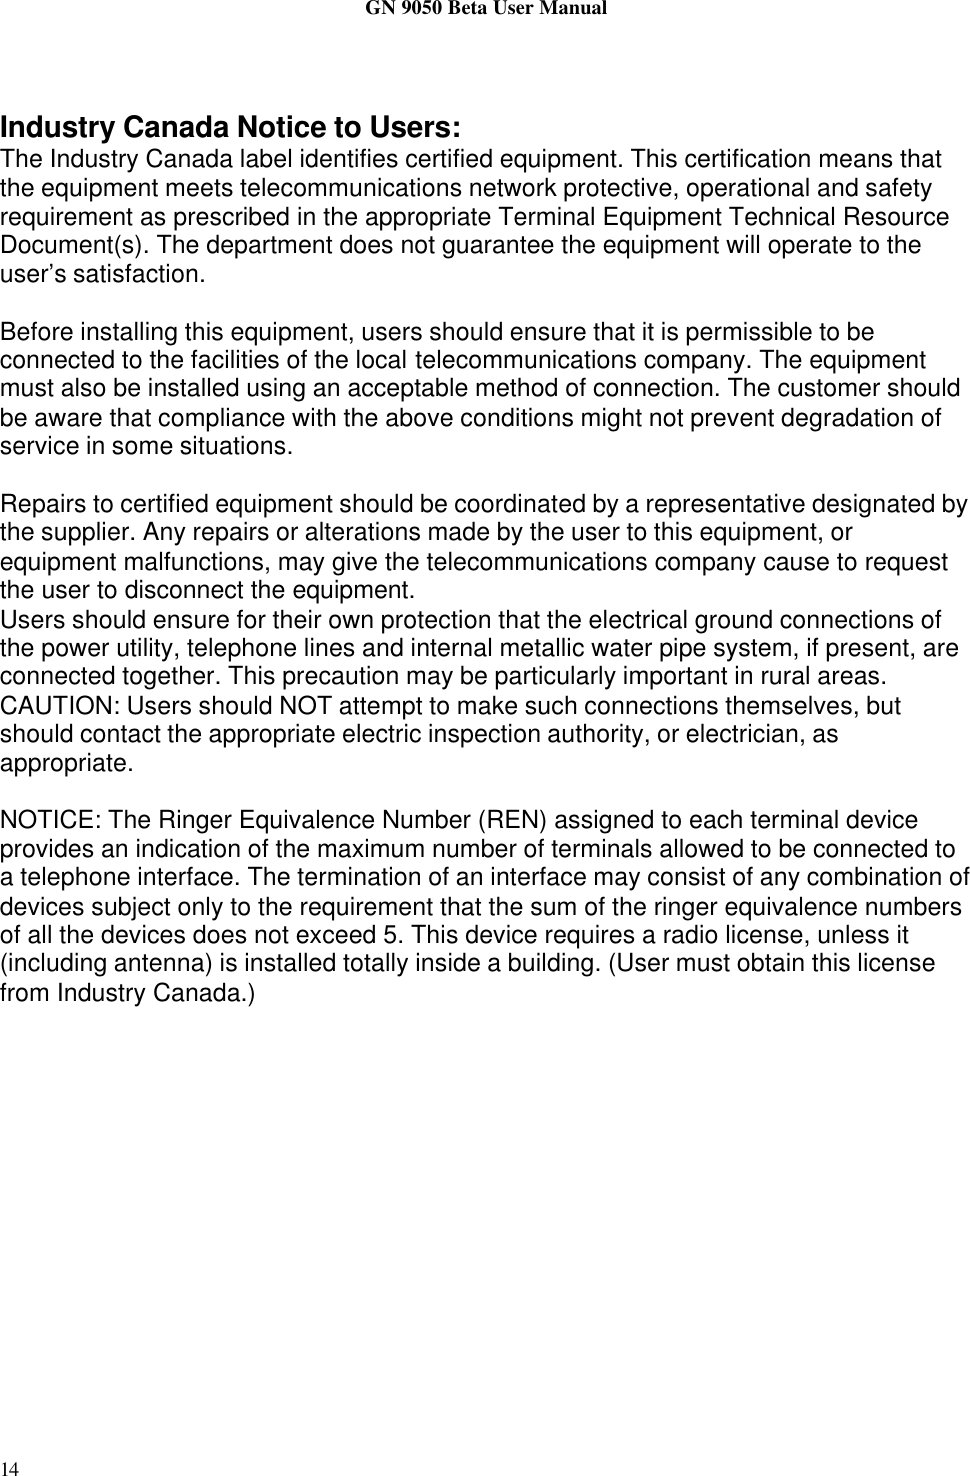 GN 9050 Beta User Manual14Industry Canada Notice to Users:The Industry Canada label identifies certified equipment. This certification means thatthe equipment meets telecommunications network protective, operational and safetyrequirement as prescribed in the appropriate Terminal Equipment Technical ResourceDocument(s). The department does not guarantee the equipment will operate to theuser’s satisfaction.Before installing this equipment, users should ensure that it is permissible to beconnected to the facilities of the local telecommunications company. The equipmentmust also be installed using an acceptable method of connection. The customer shouldbe aware that compliance with the above conditions might not prevent degradation ofservice in some situations.Repairs to certified equipment should be coordinated by a representative designated bythe supplier. Any repairs or alterations made by the user to this equipment, orequipment malfunctions, may give the telecommunications company cause to requestthe user to disconnect the equipment.Users should ensure for their own protection that the electrical ground connections ofthe power utility, telephone lines and internal metallic water pipe system, if present, areconnected together. This precaution may be particularly important in rural areas.CAUTION: Users should NOT attempt to make such connections themselves, butshould contact the appropriate electric inspection authority, or electrician, asappropriate.NOTICE: The Ringer Equivalence Number (REN) assigned to each terminal deviceprovides an indication of the maximum number of terminals allowed to be connected toa telephone interface. The termination of an interface may consist of any combination ofdevices subject only to the requirement that the sum of the ringer equivalence numbersof all the devices does not exceed 5. This device requires a radio license, unless it(including antenna) is installed totally inside a building. (User must obtain this licensefrom Industry Canada.)